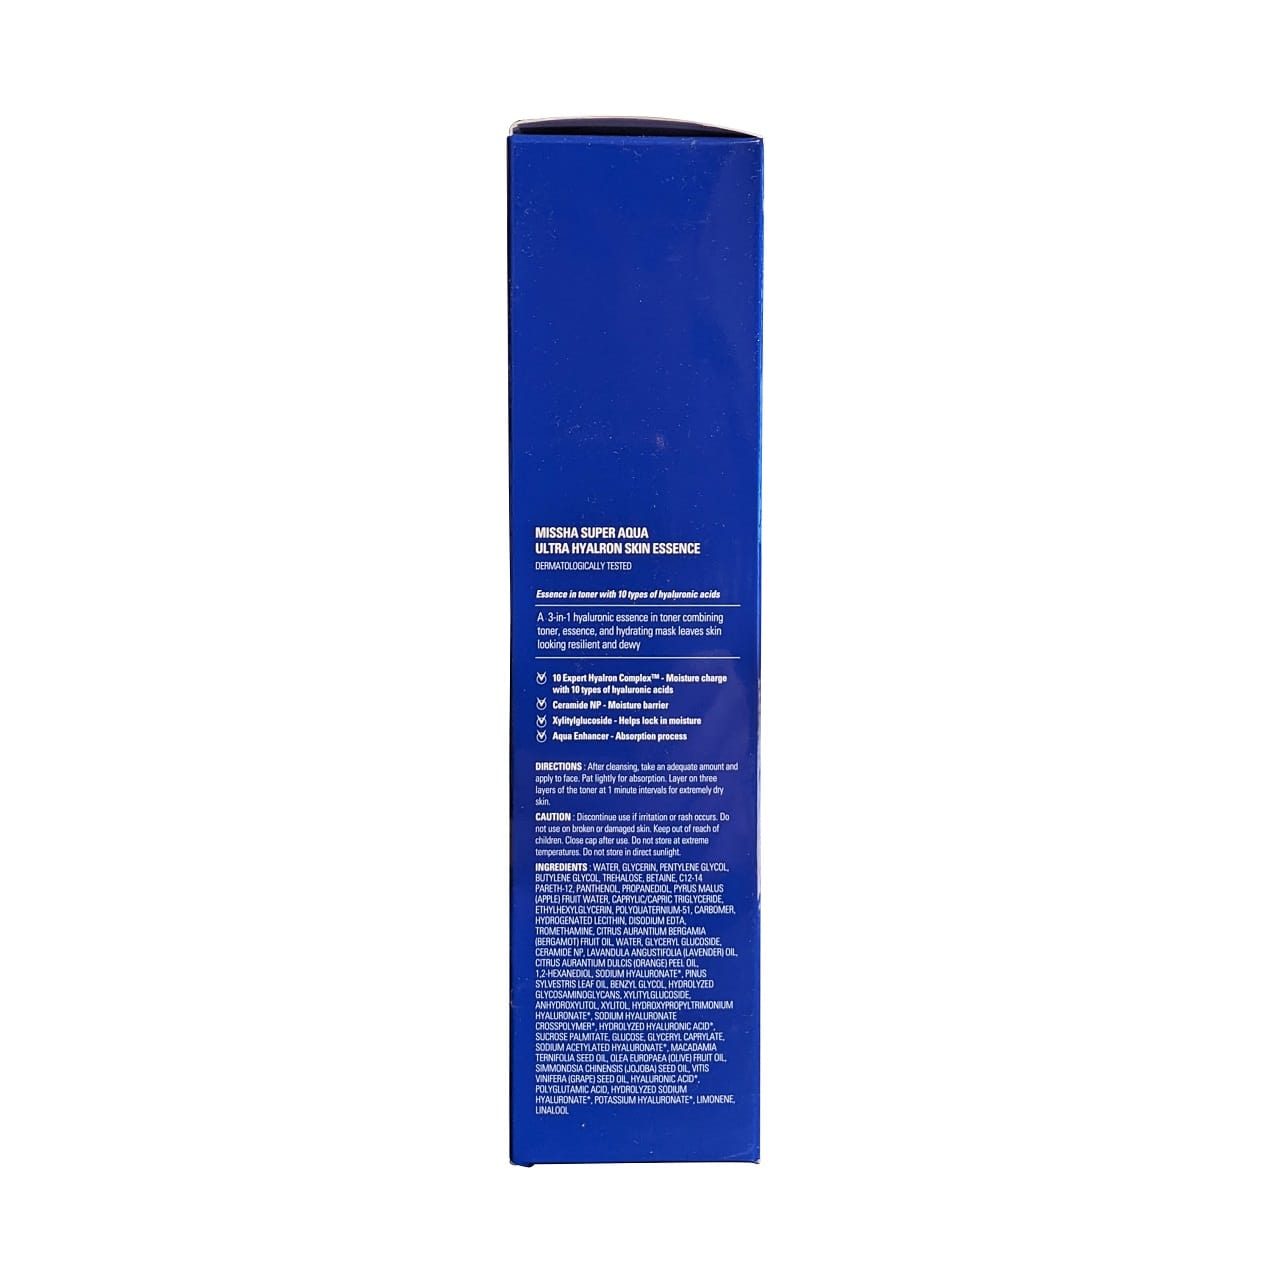 Directions, caution, and ingredients for MISSHA Super Aqua Ultra Hyalron Skin Essence (200 mL) in English